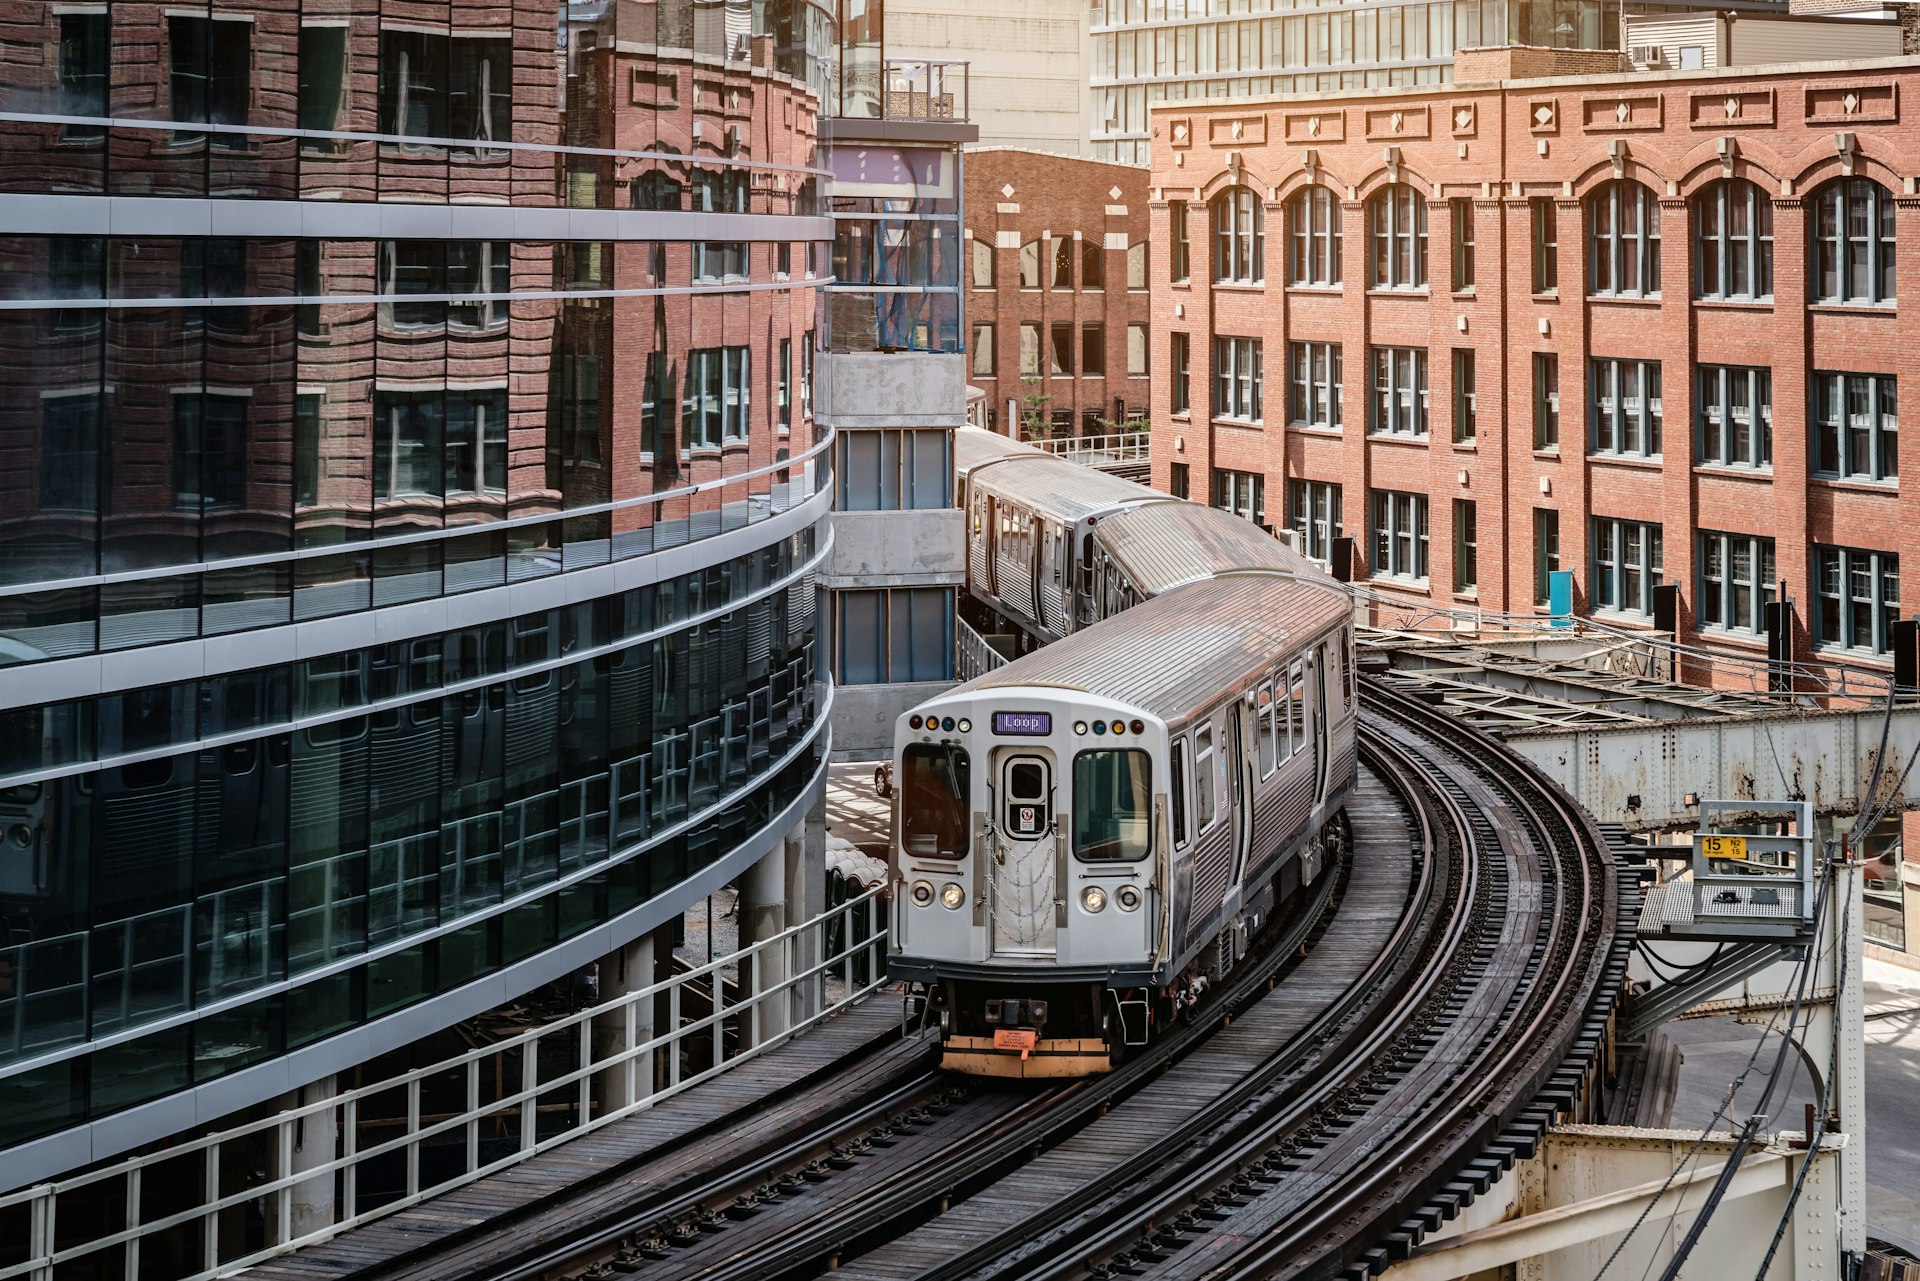 A silver commuter train runs on an elevated track between buildings